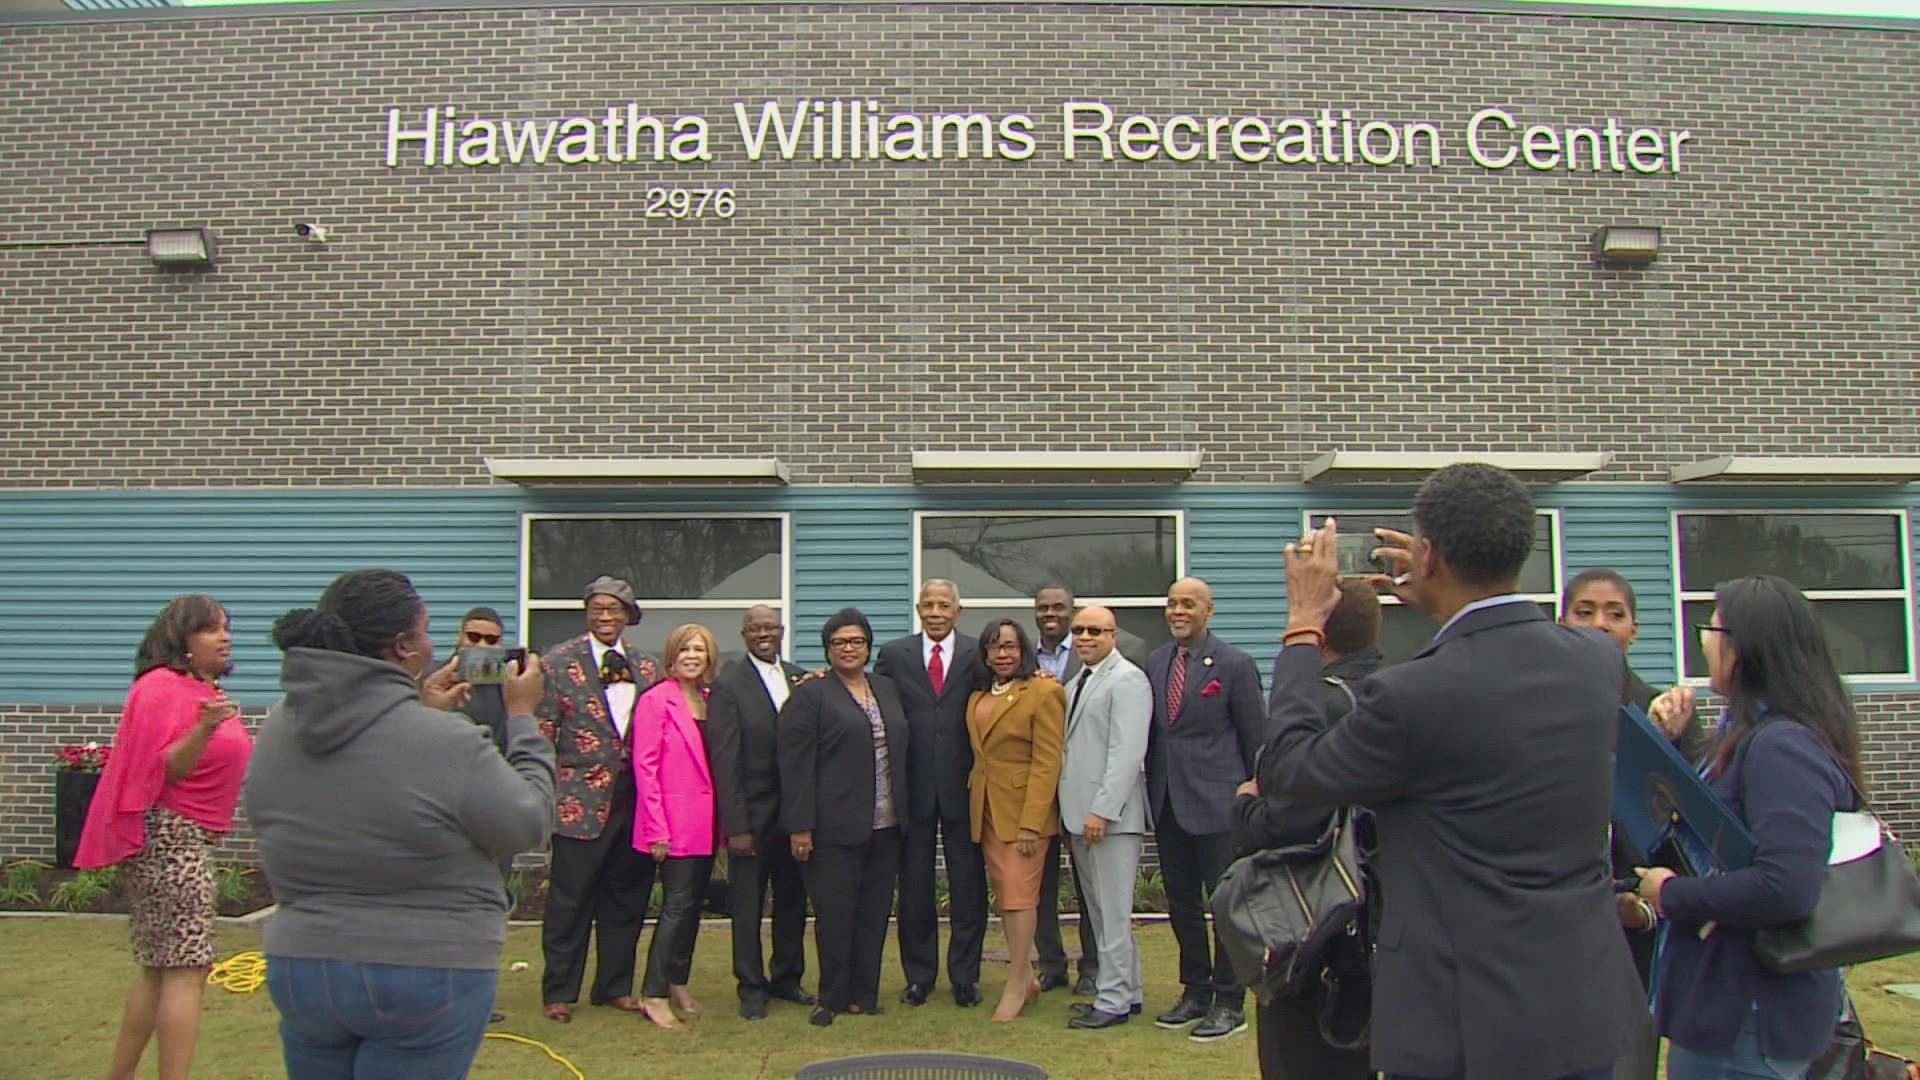 The Cummings Recreation Center in Dallas is being renamed for Hiawatha Williams.